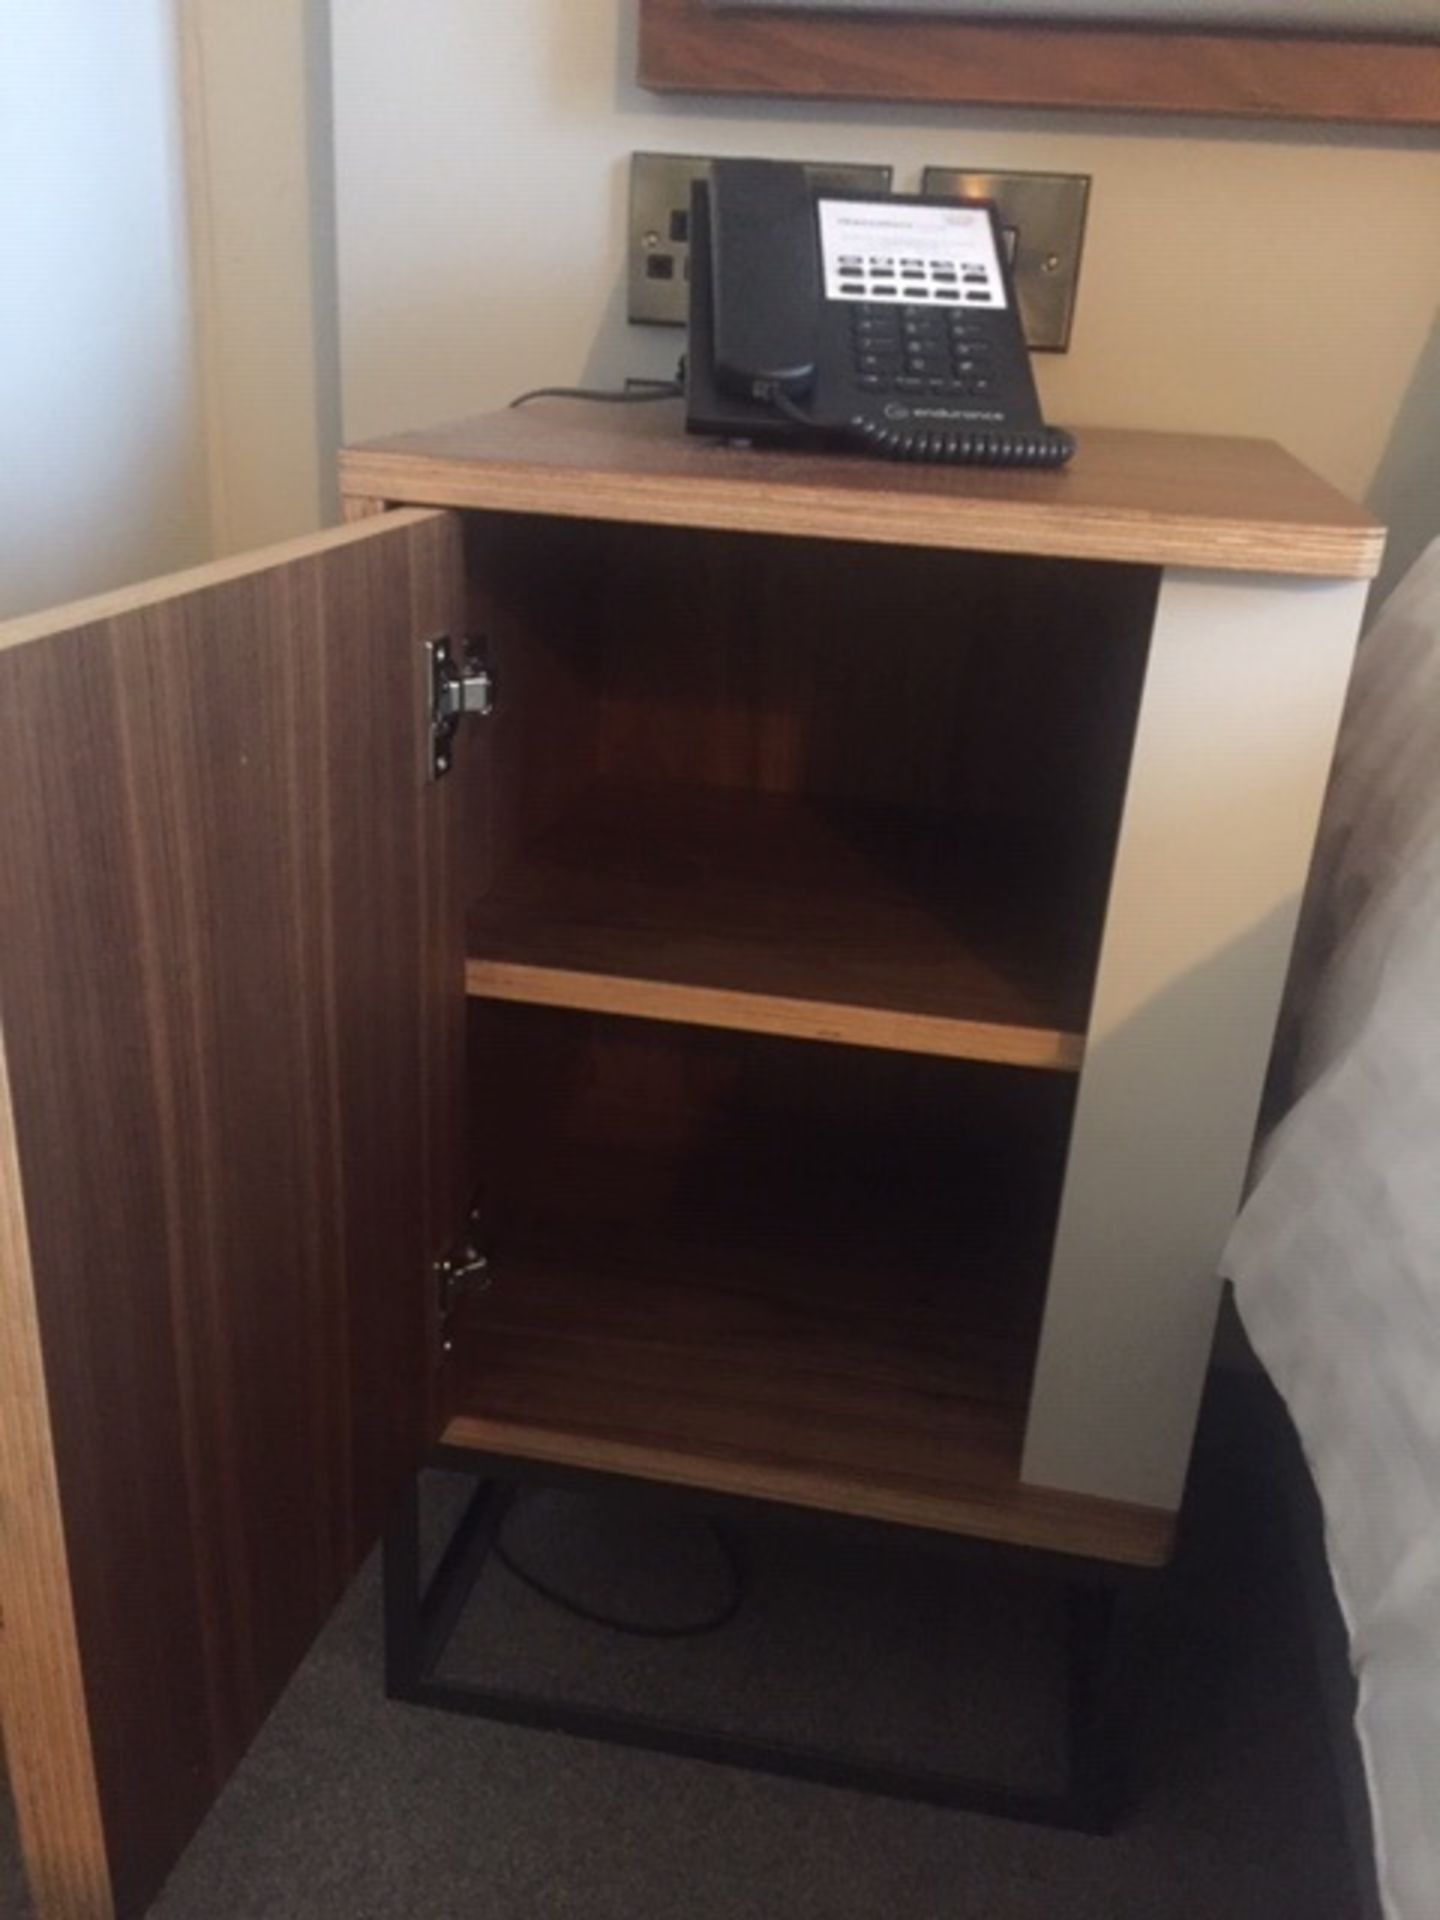 Set of matching bedroom furniture and ancillary items under 3 years old and in excellent condition - Image 19 of 32